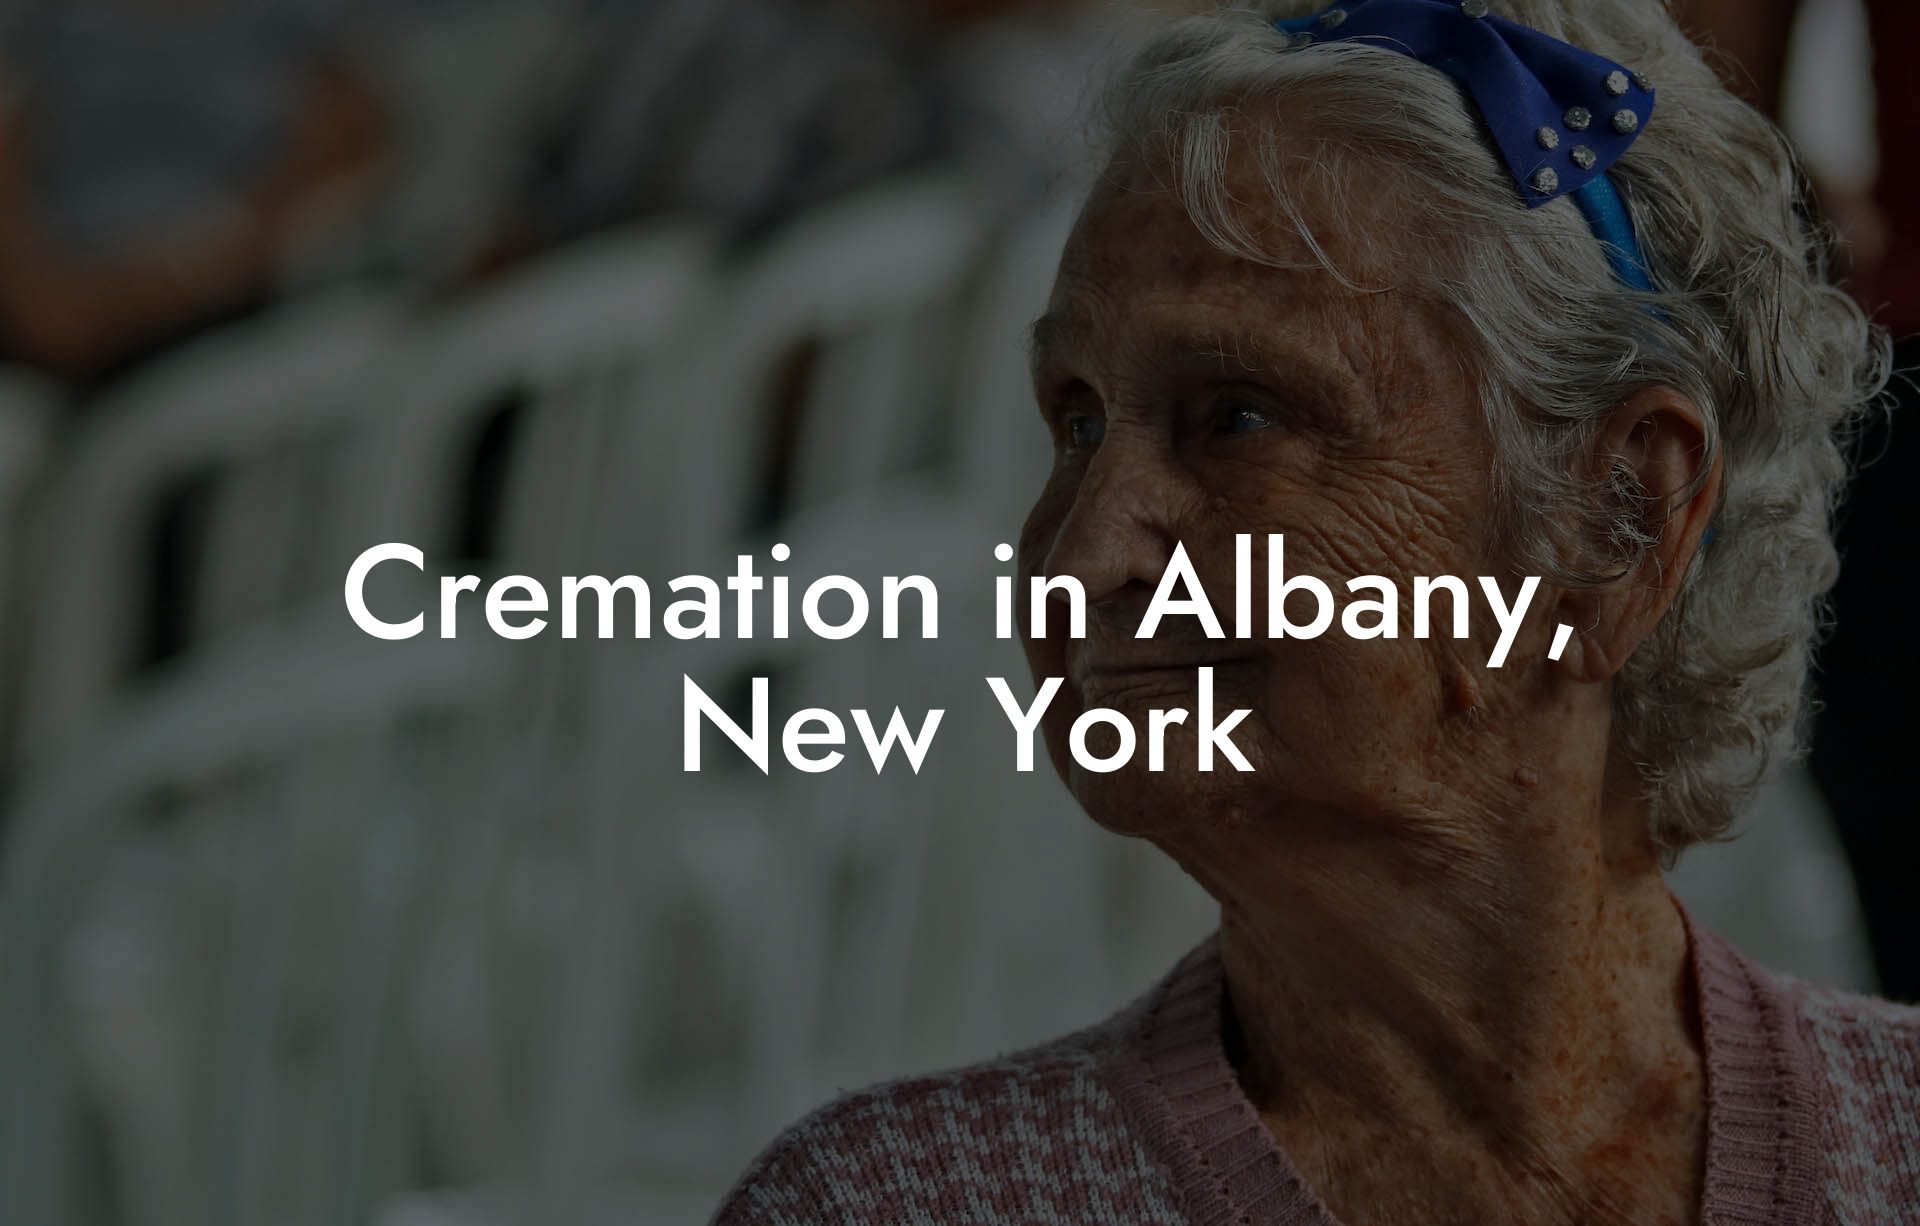 Cremation in Albany, New York